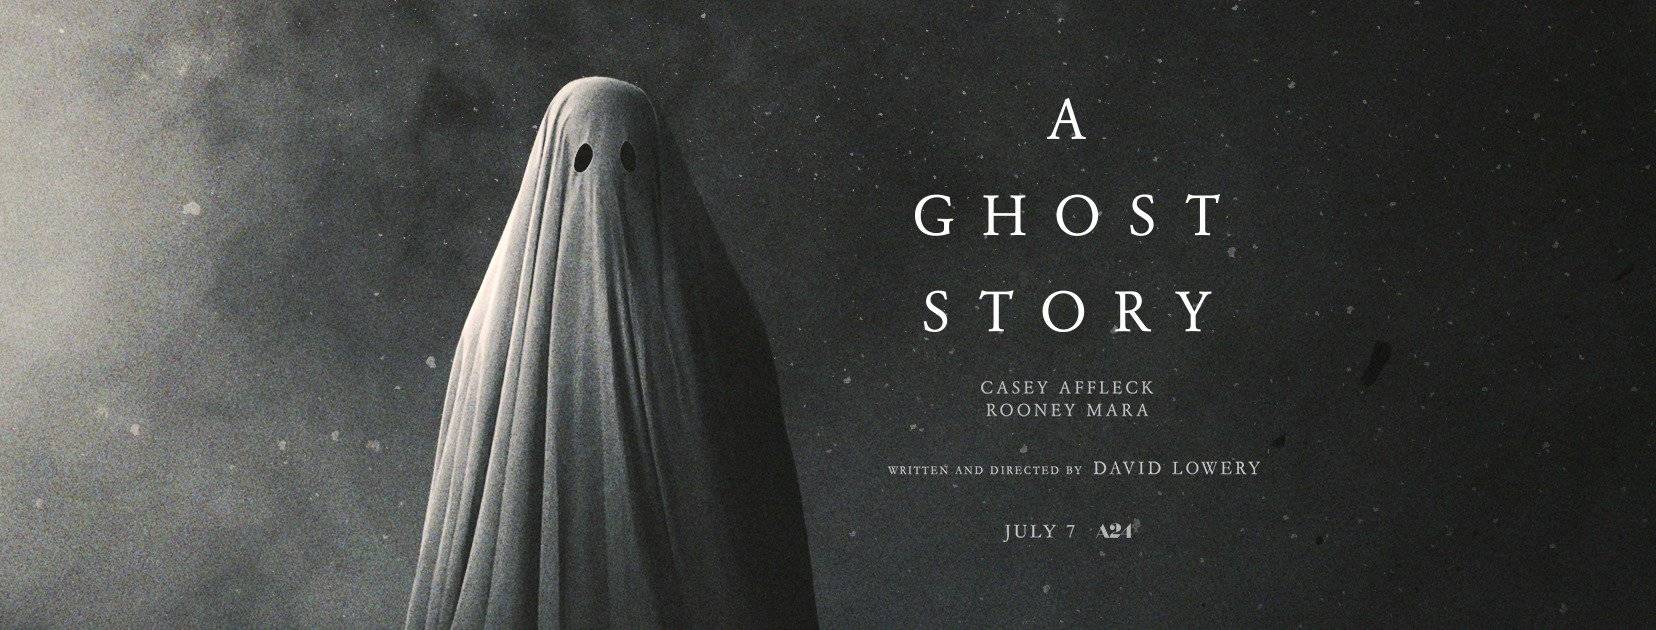 A Ghost Story / A Ghost Story (2017)